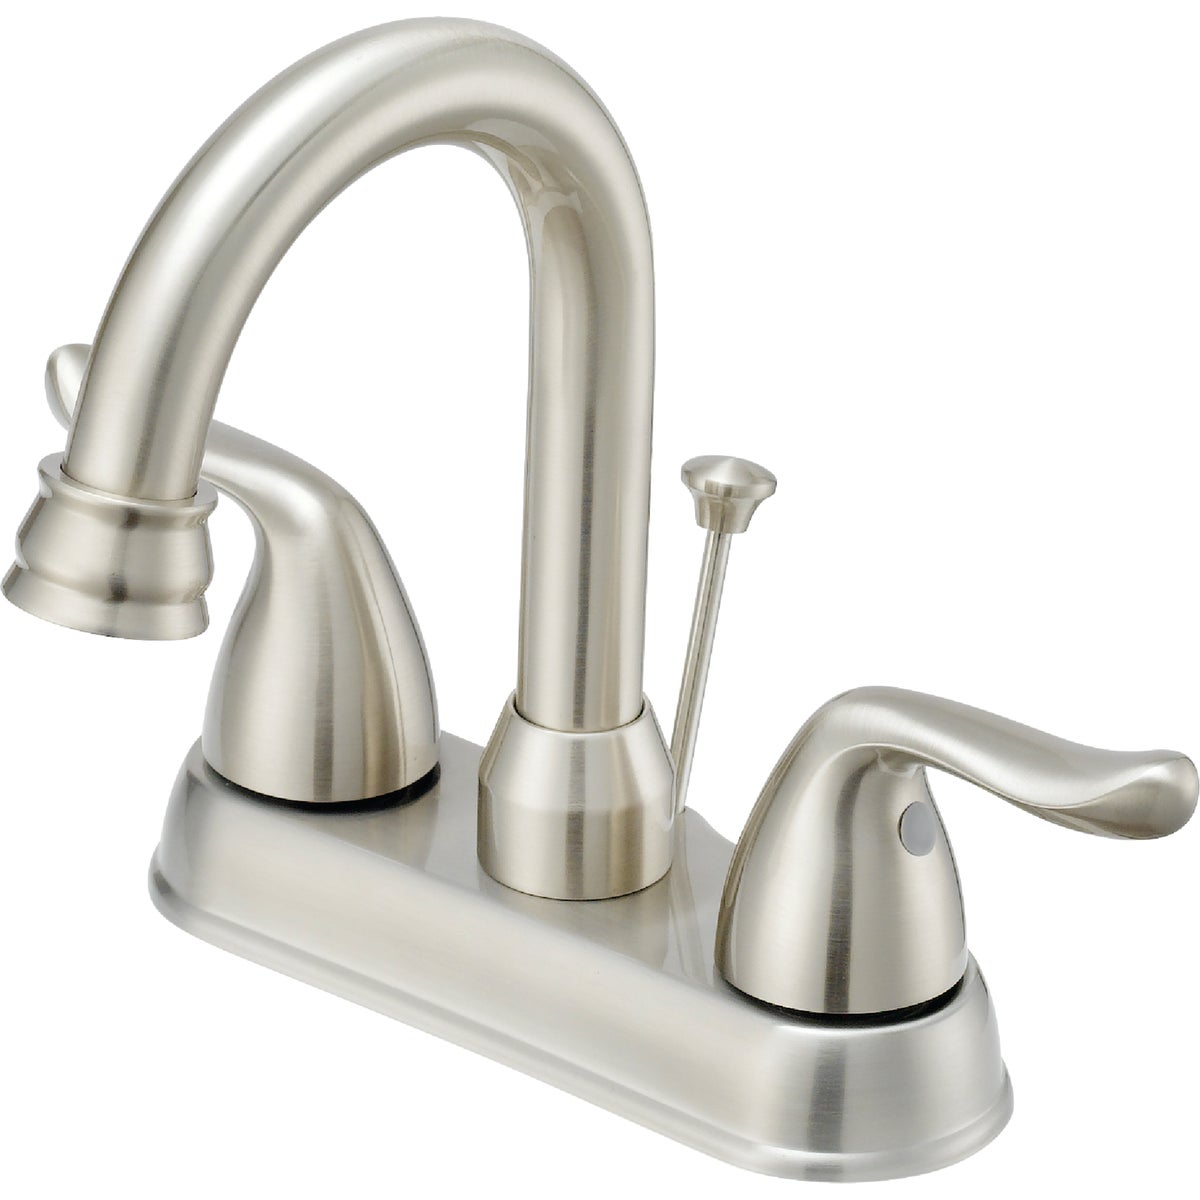 Item 405169, Two handle bathroom faucet with hi-arc spout and pop-up drain.